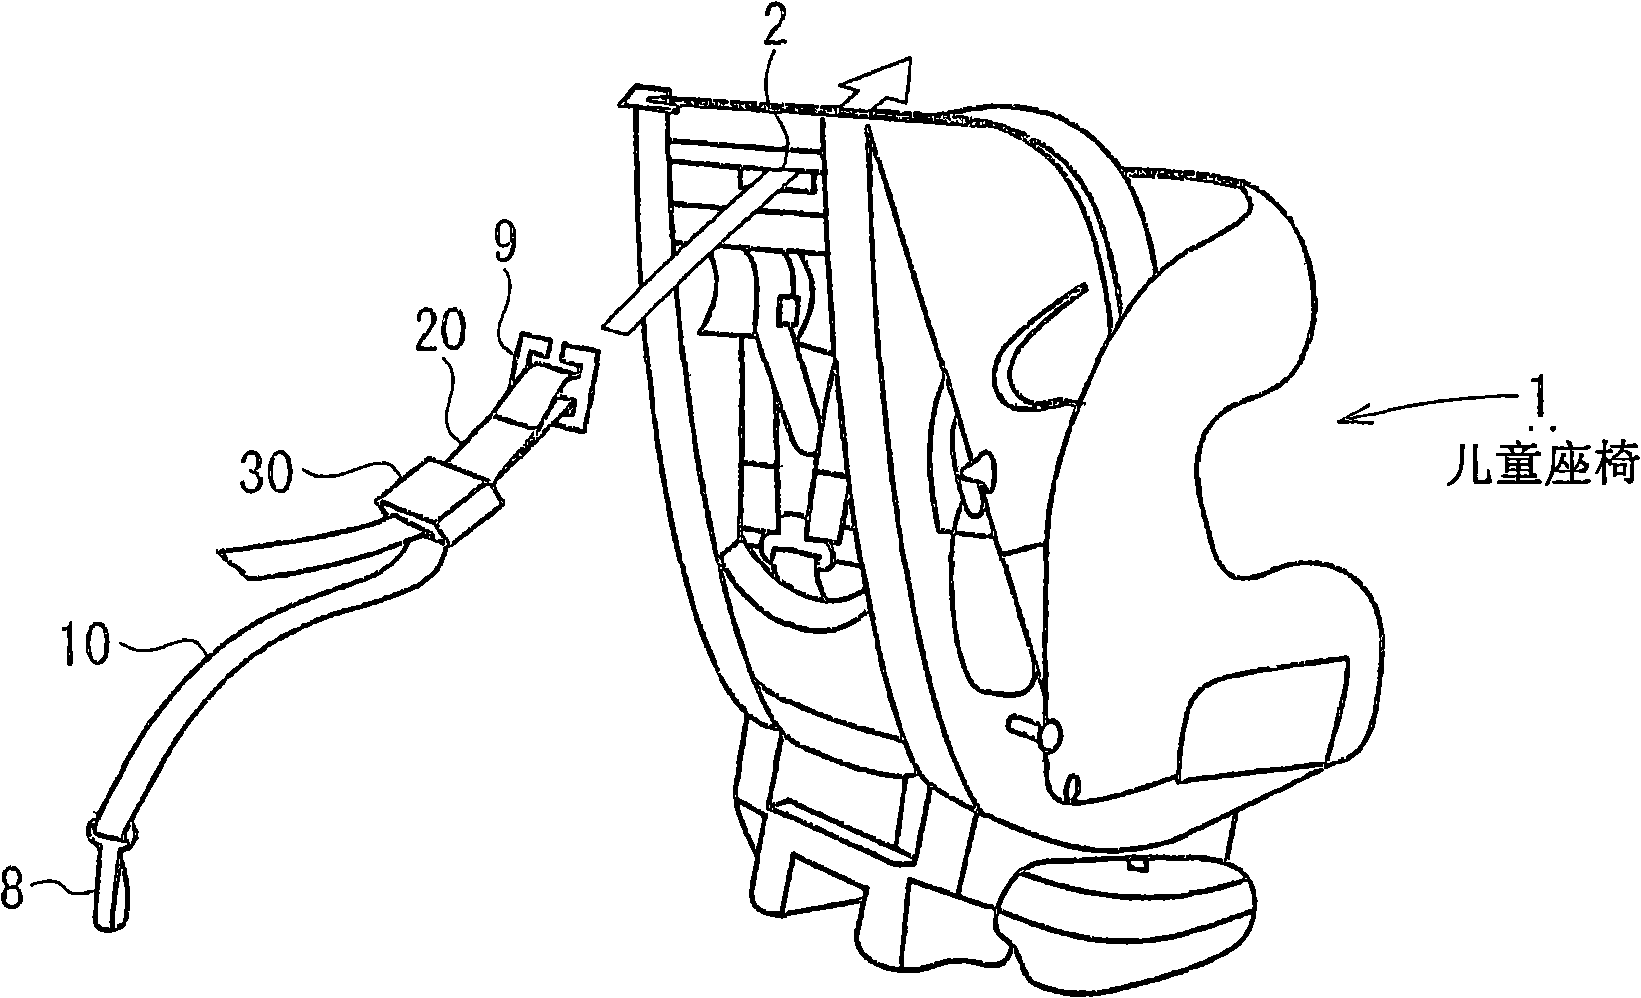 Child seat anchoring device and child seat